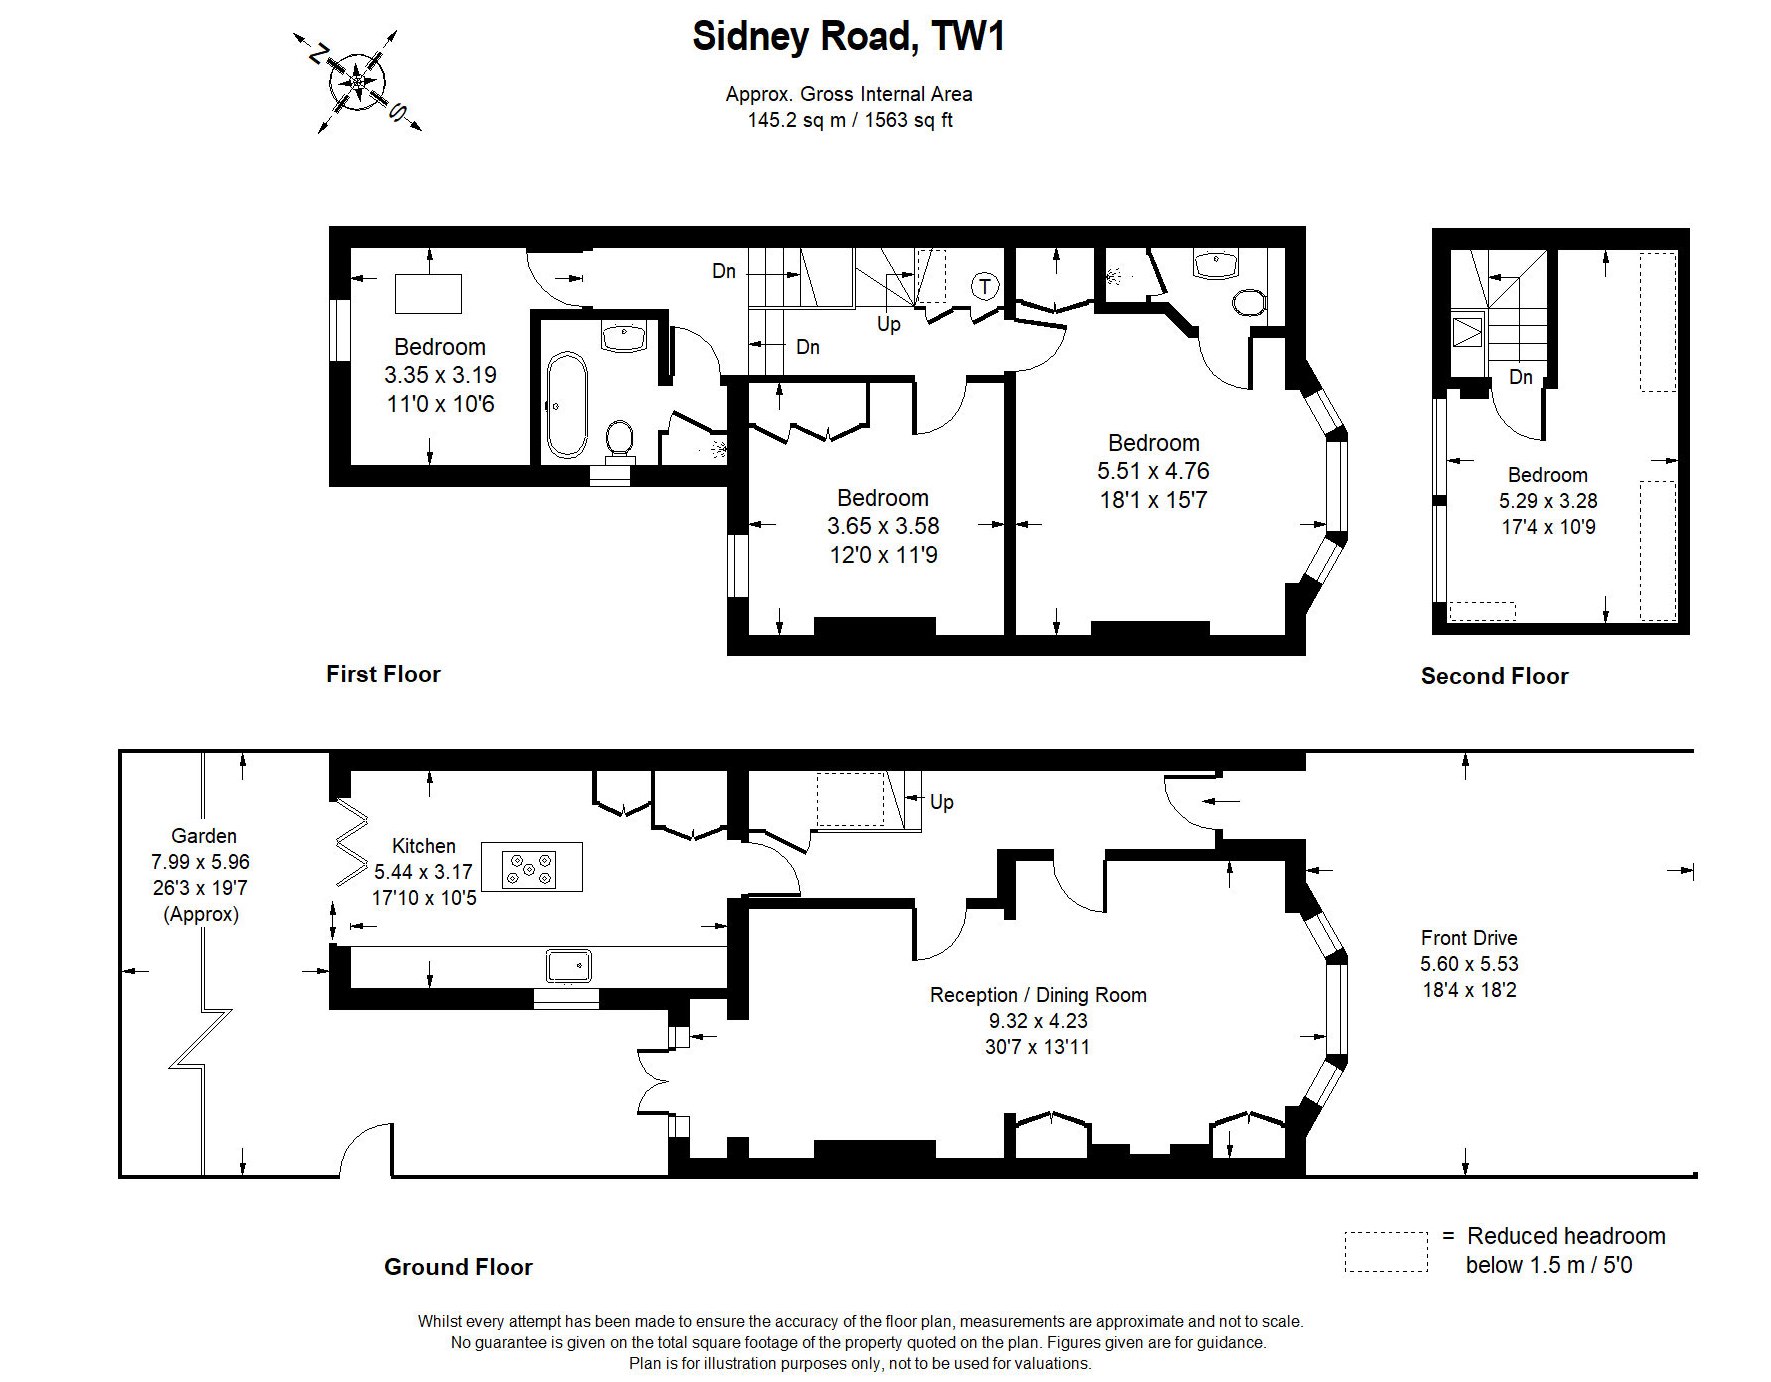 4 Bedrooms Semi-detached house to rent in Sidney Road, St Margarets TW1